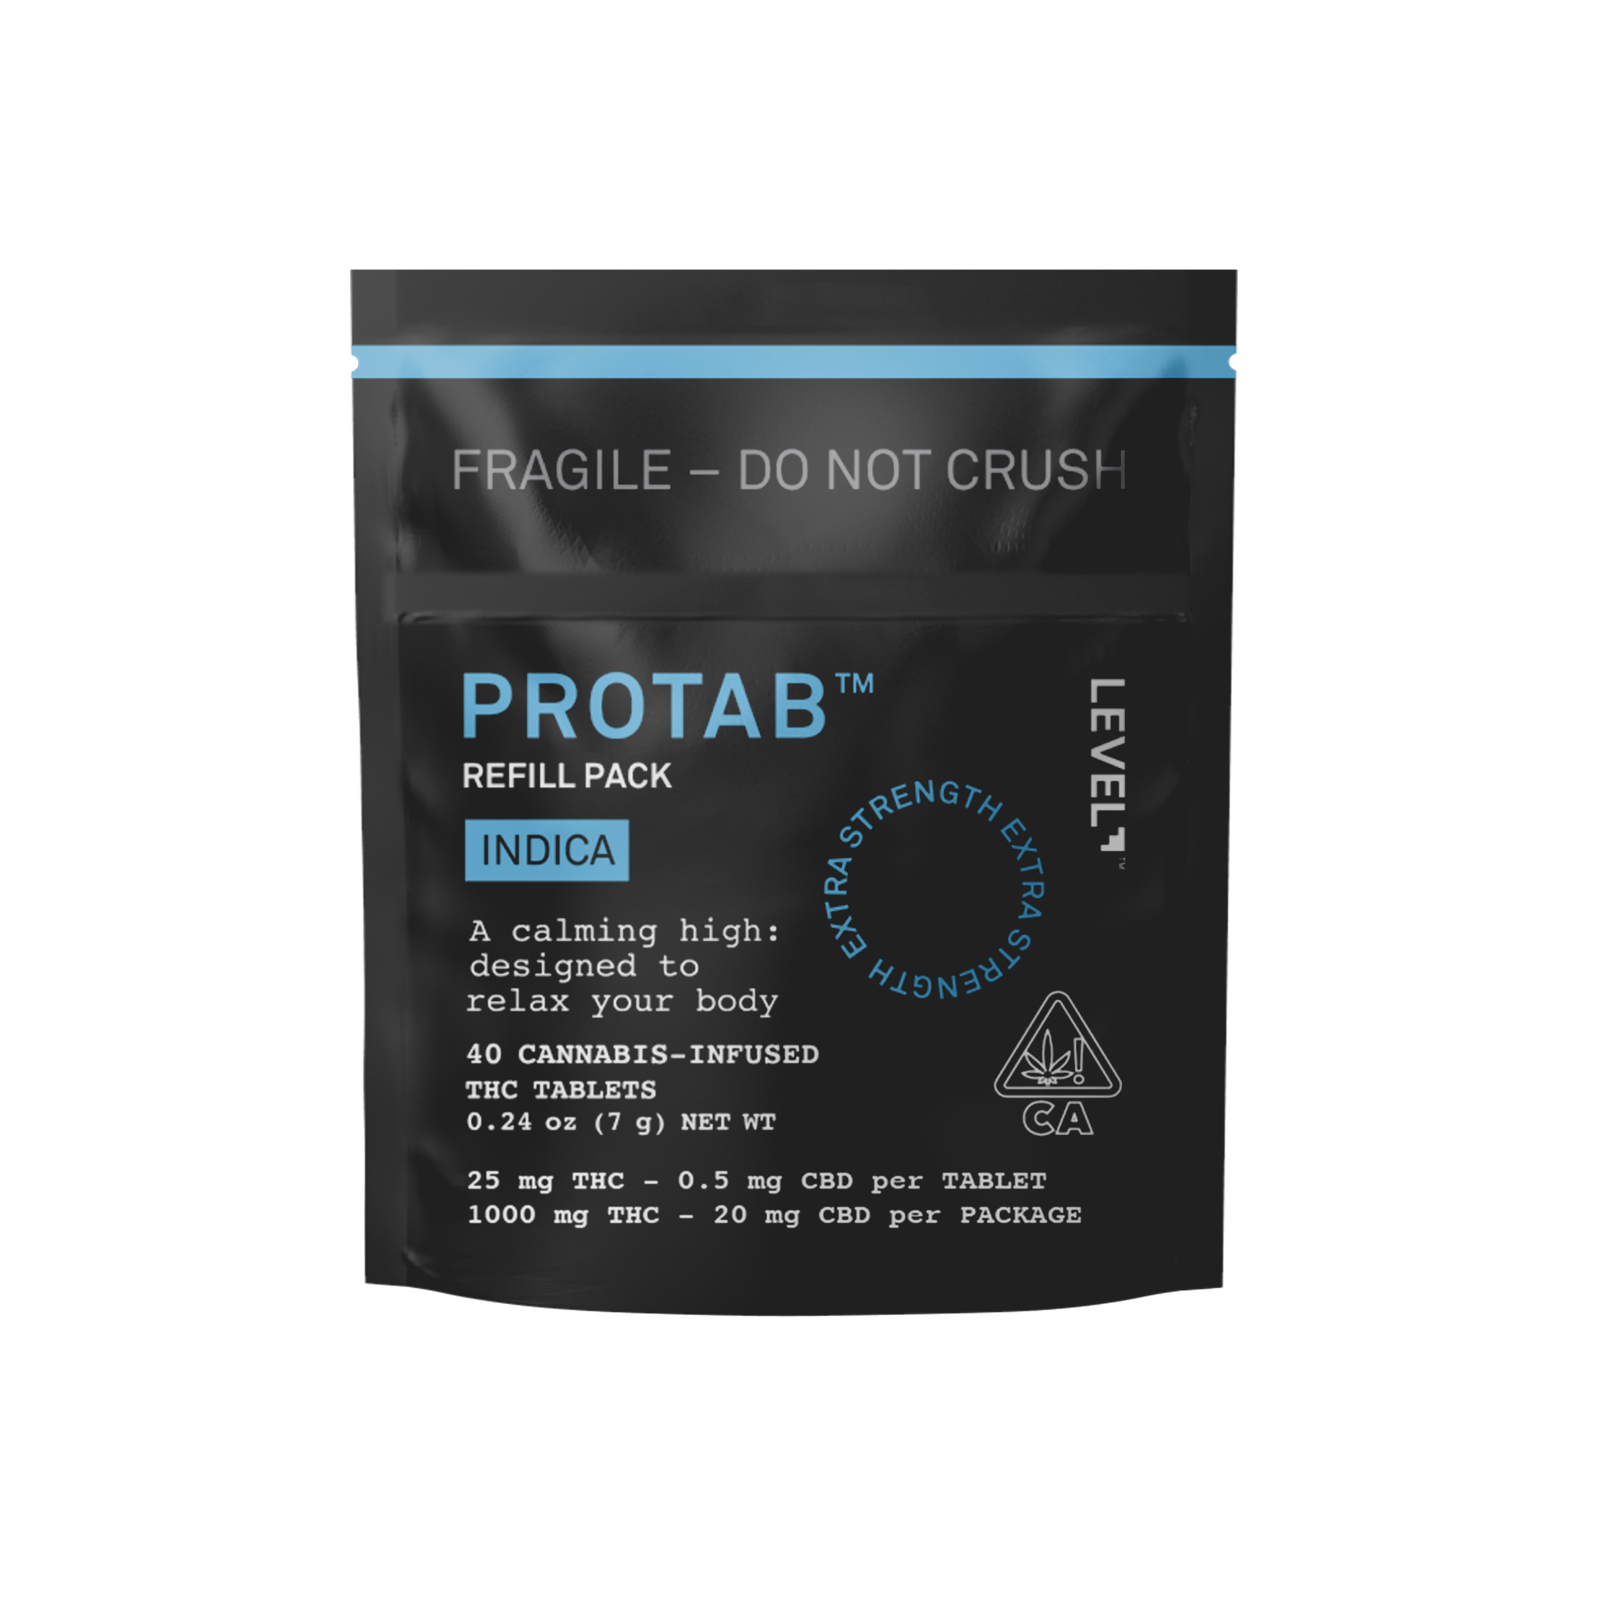 A photograph of Level Protab Refill Pack Indica